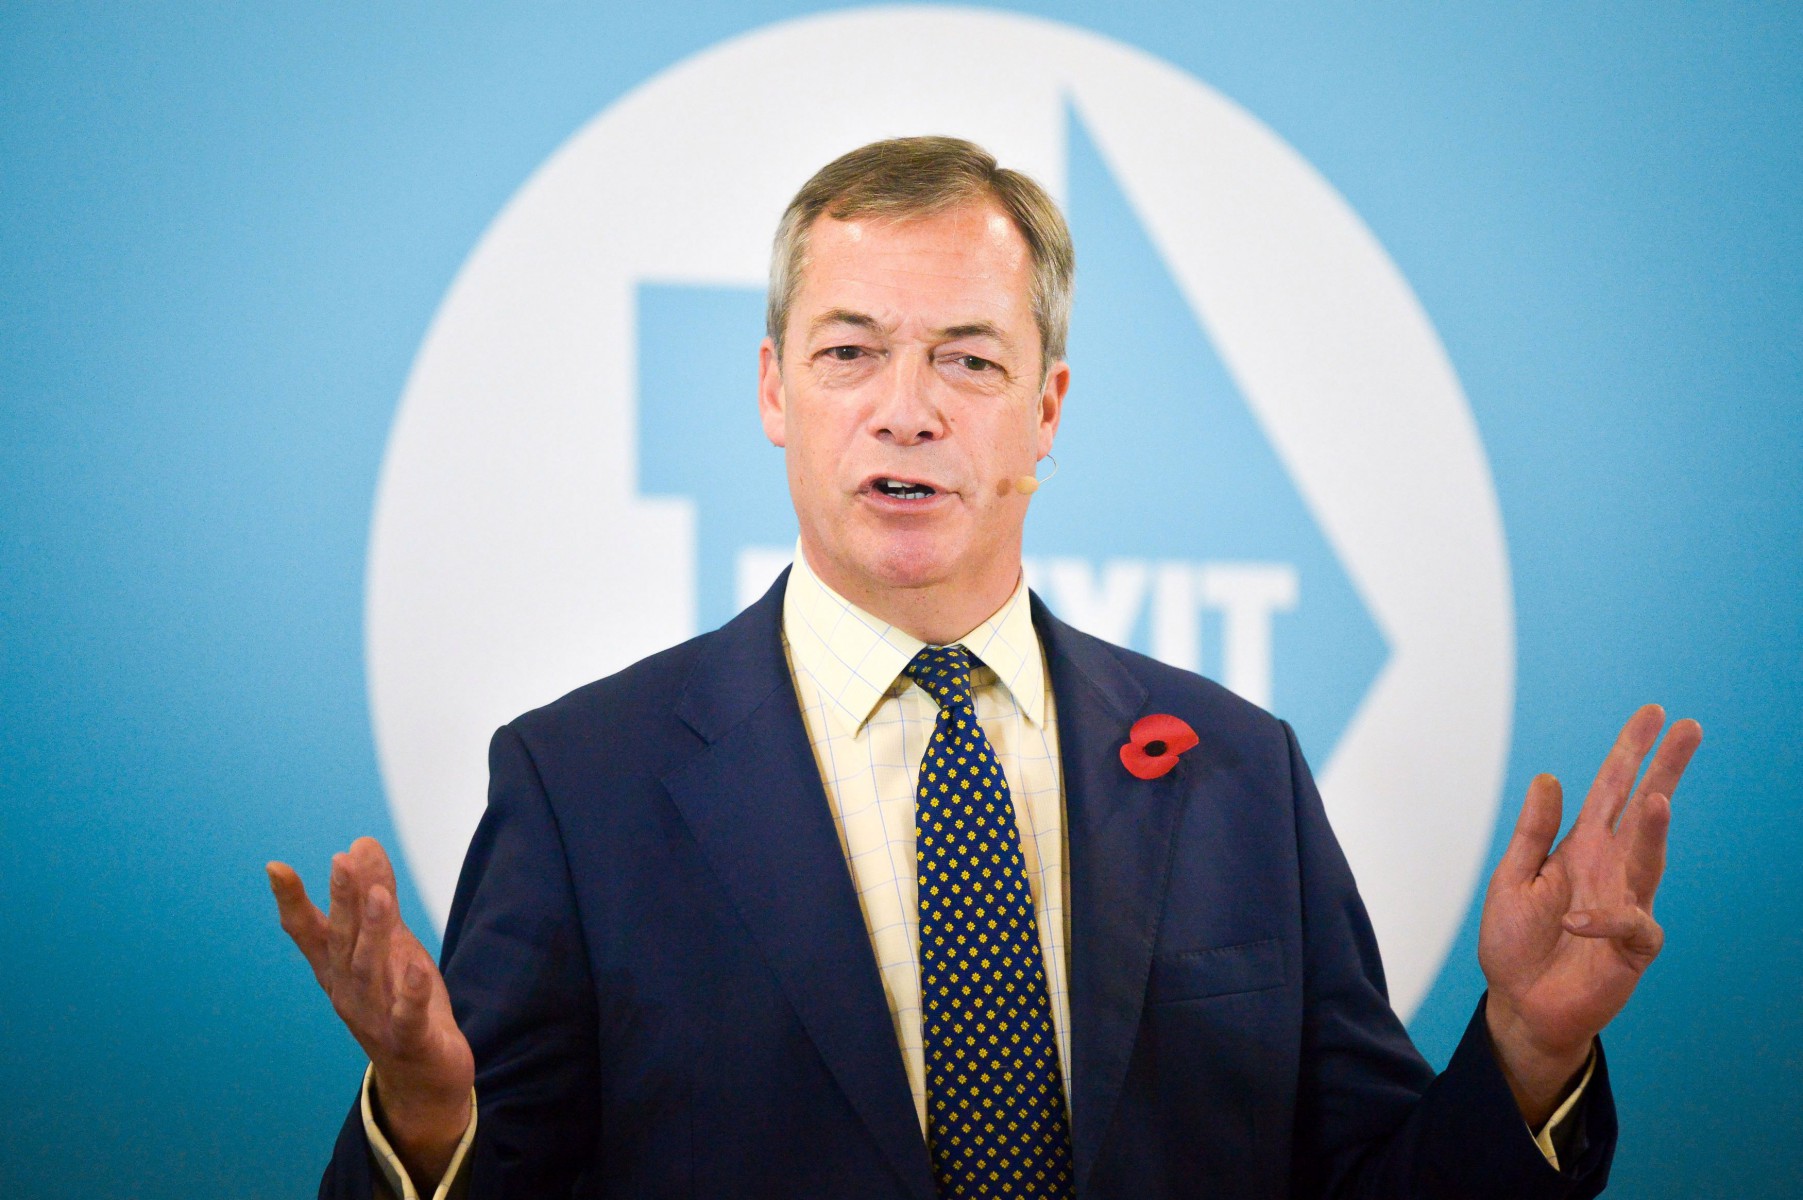 Nigel Farage was the third most popular leader to date